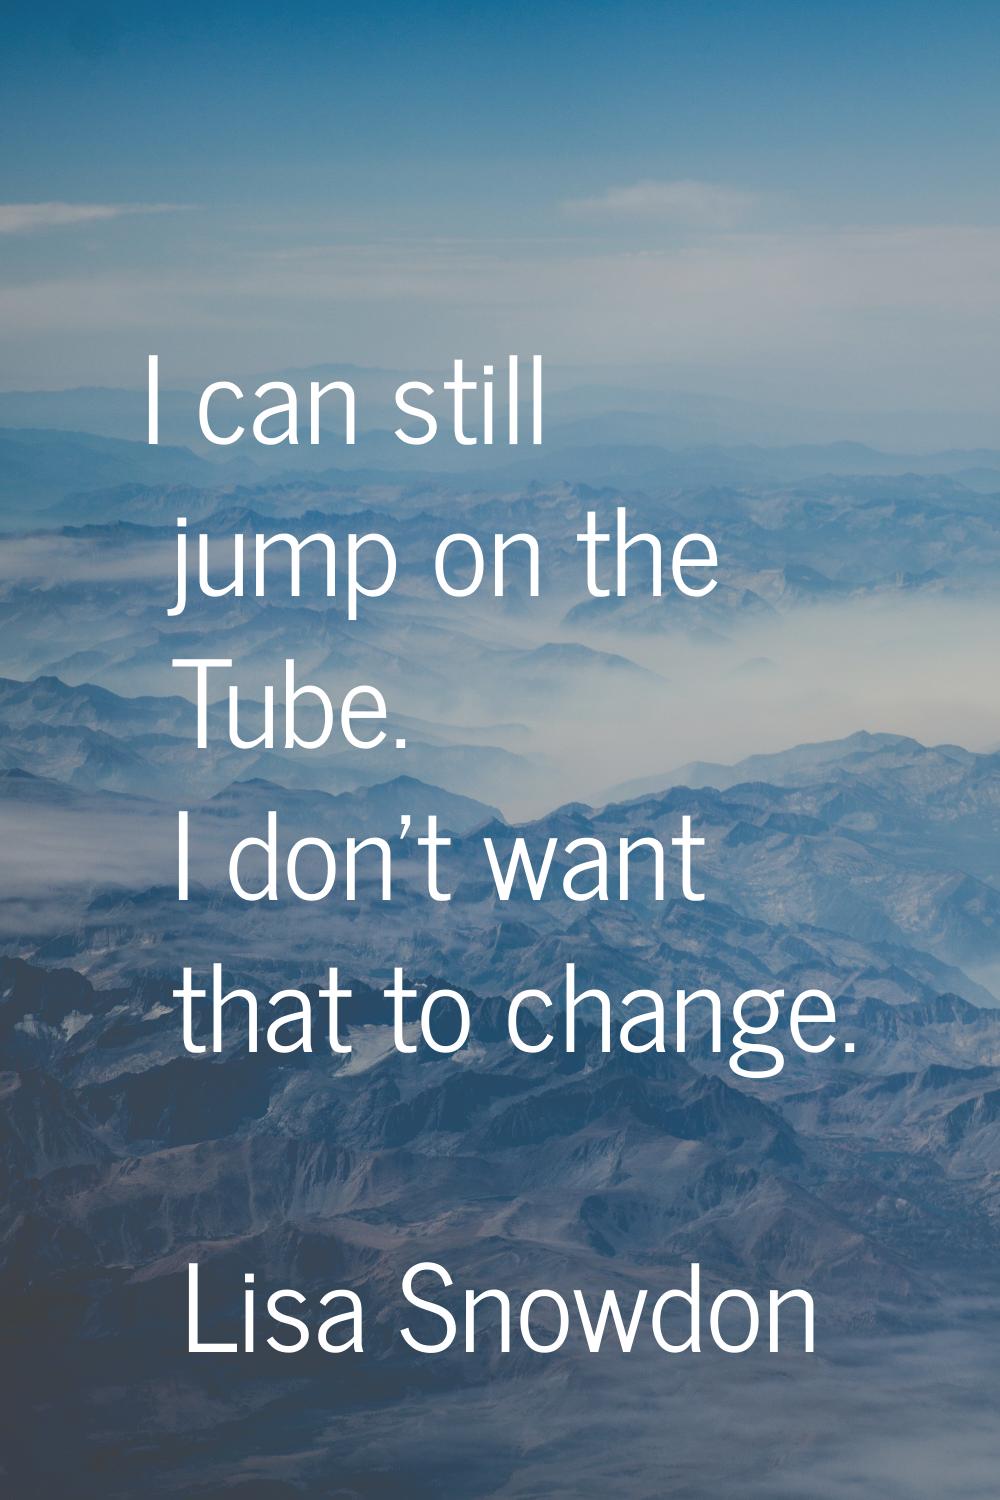 I can still jump on the Tube. I don't want that to change.